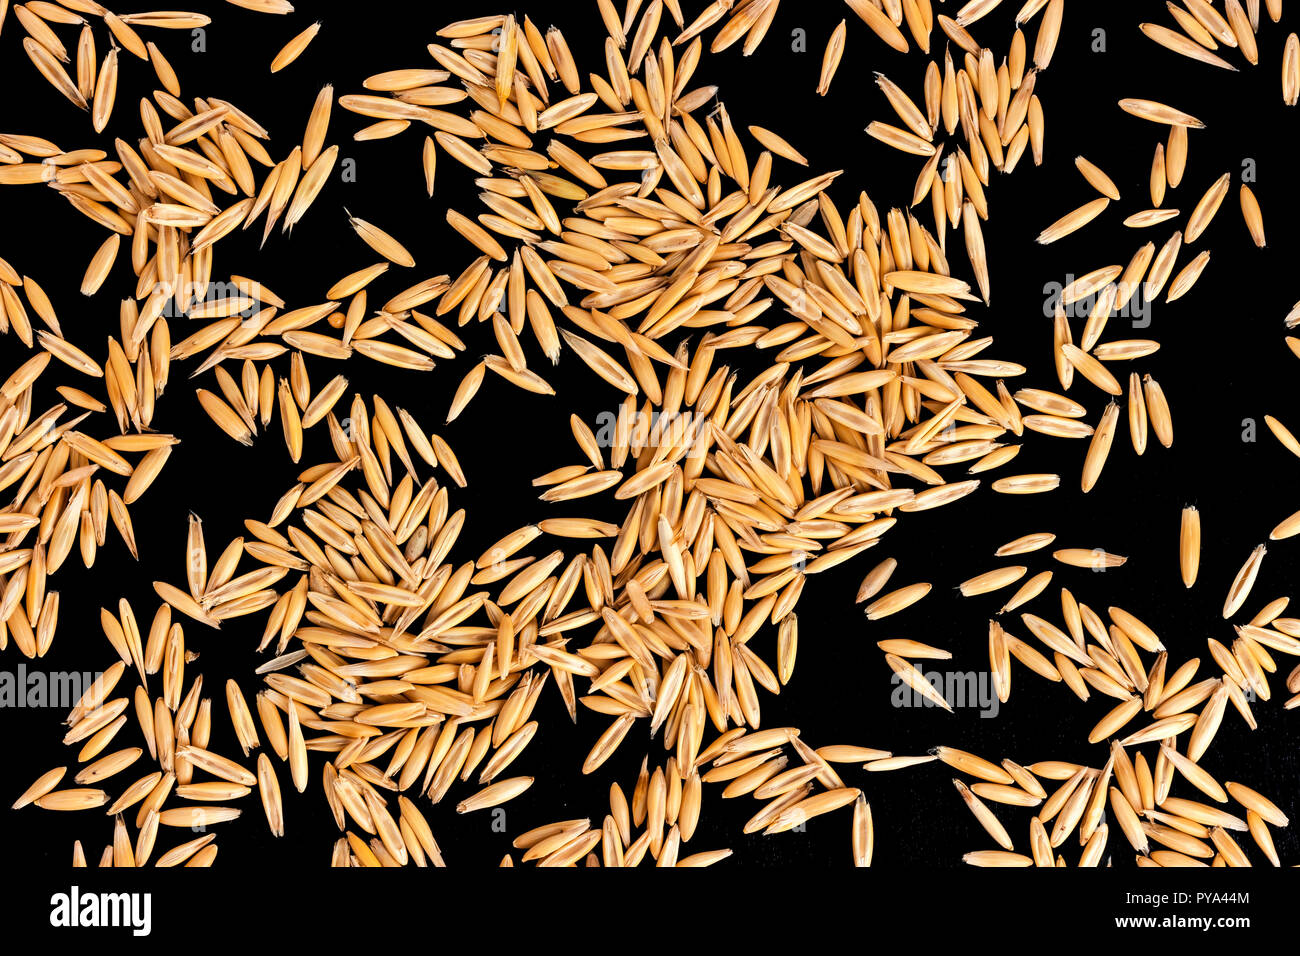 Pile of oat seeds on black background, top view Stock Photo